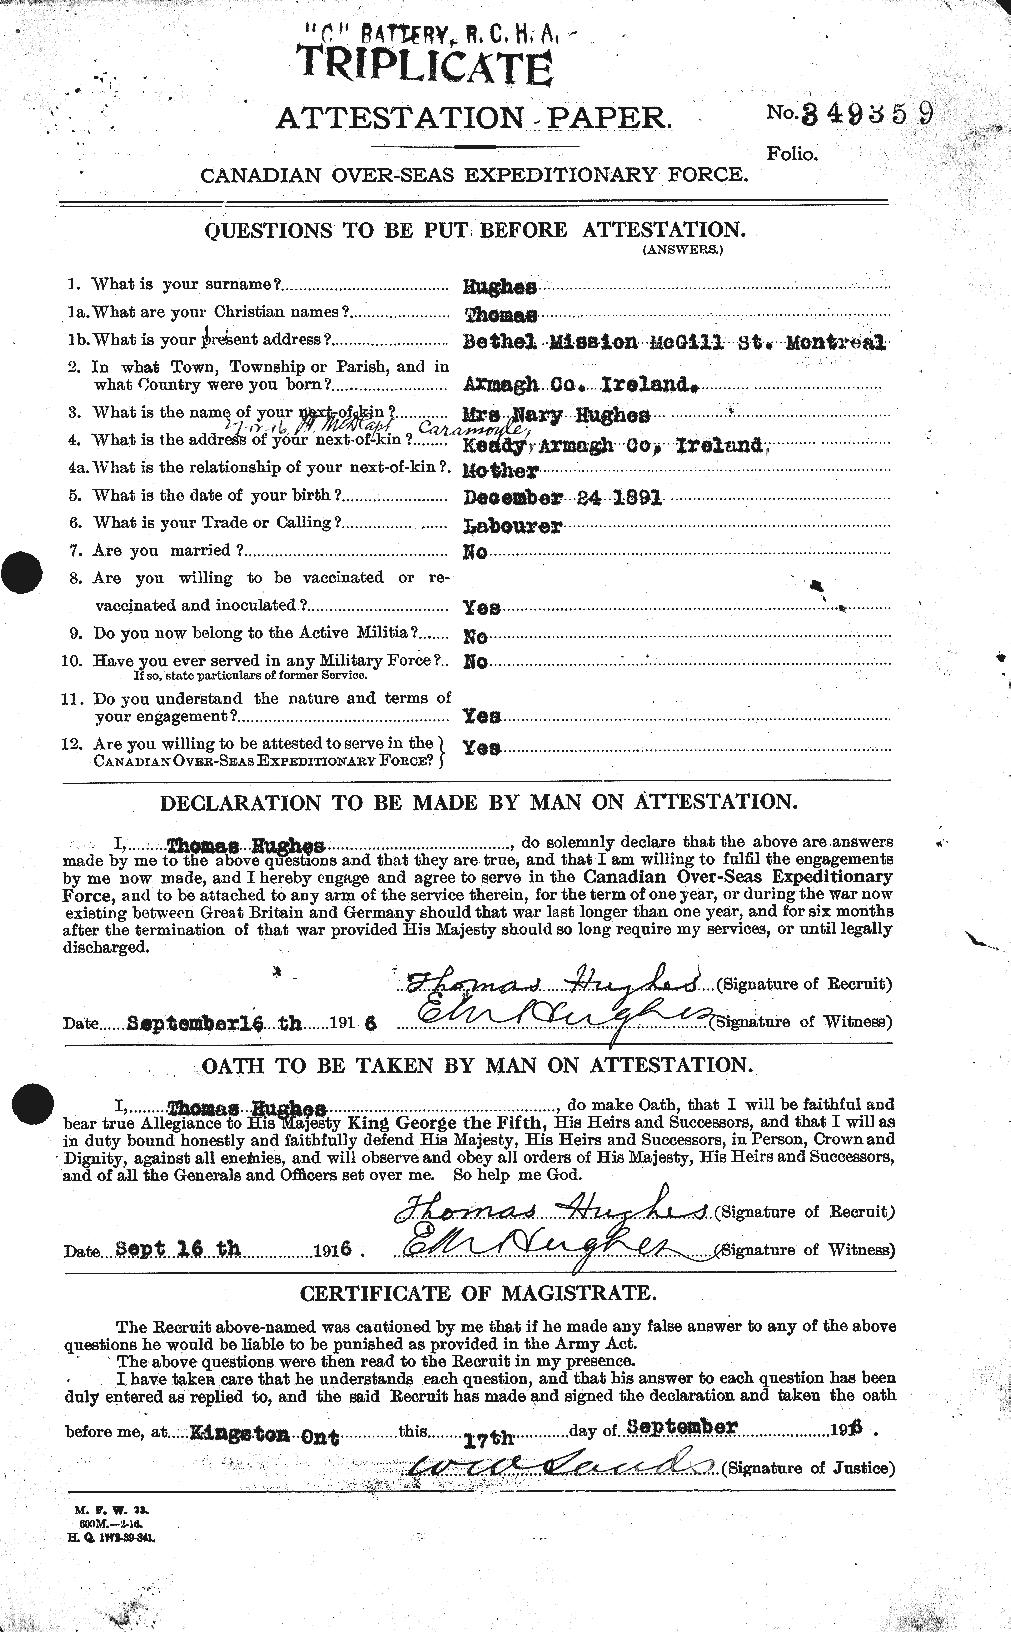 Personnel Records of the First World War - CEF 406669a